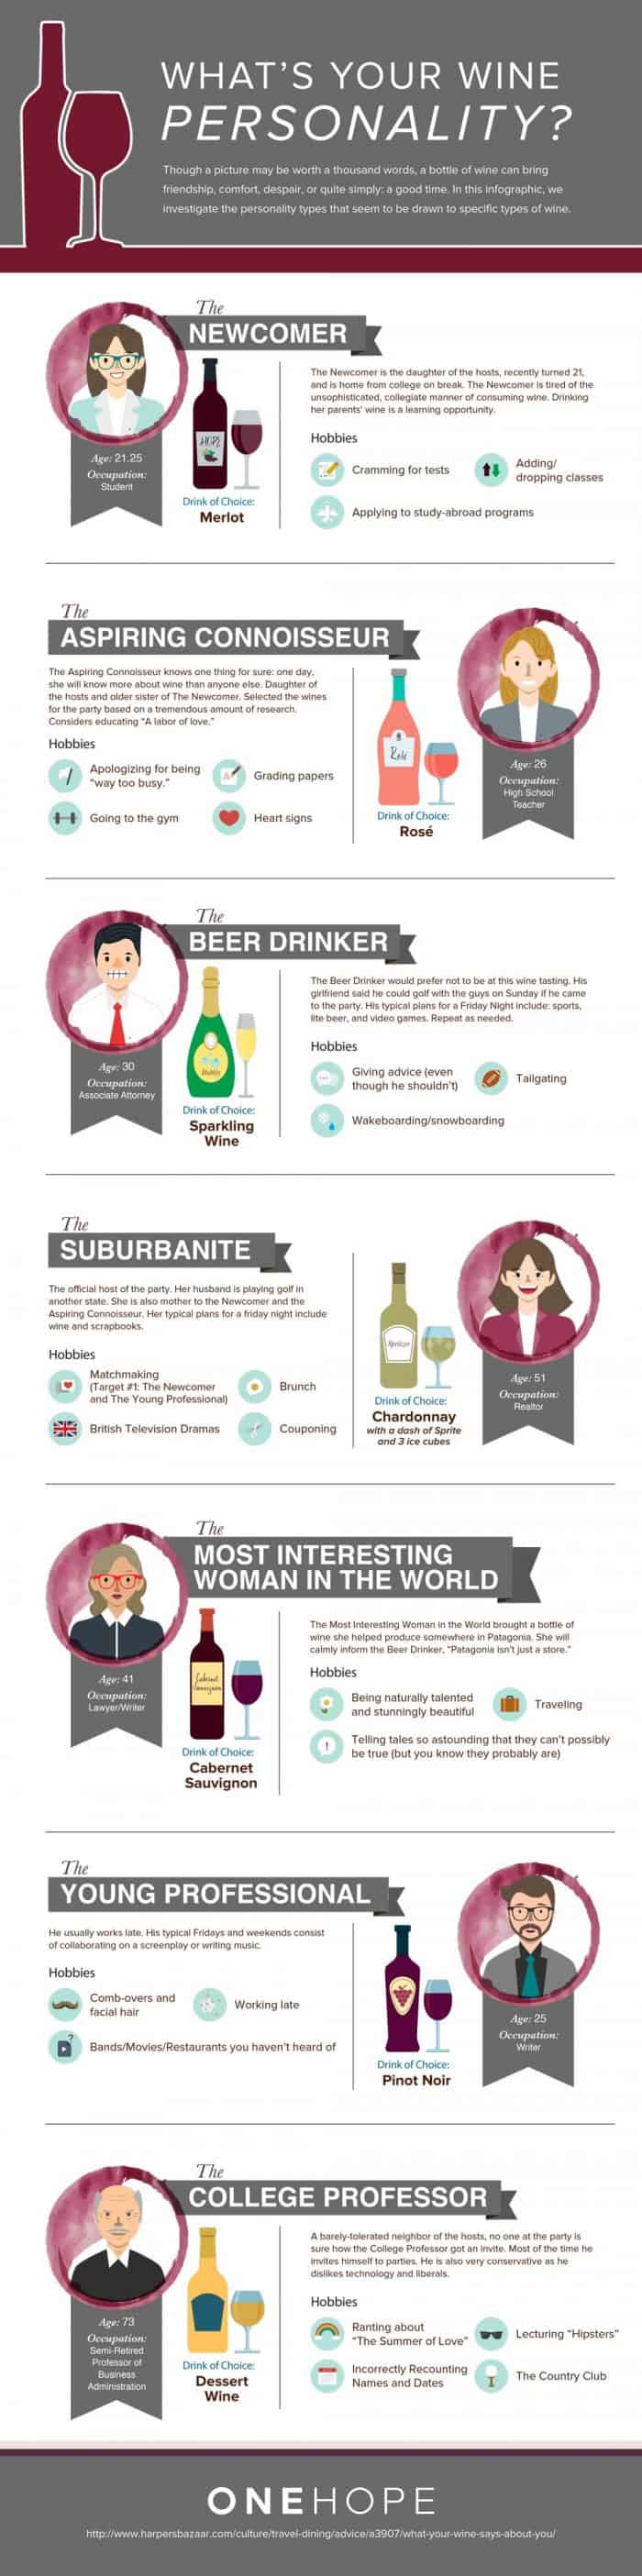 What’s Your Wine Personality Infographic